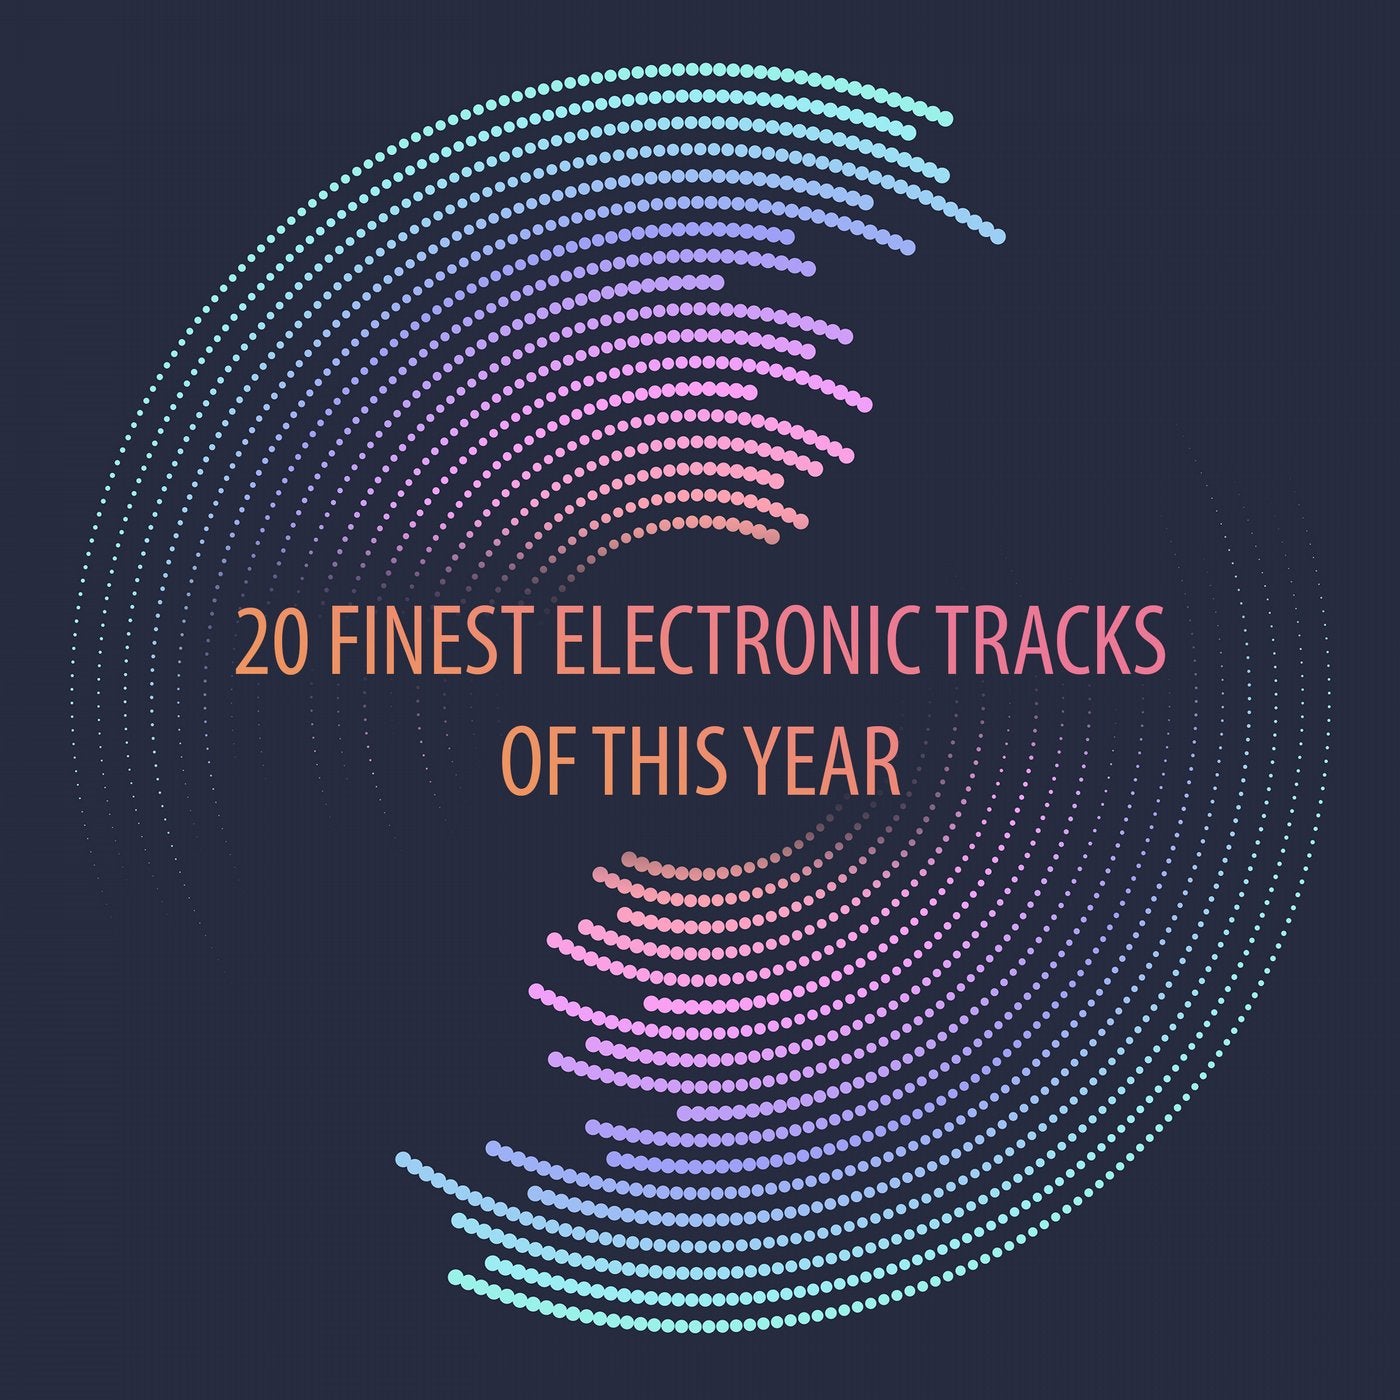 20 Finest Electronic Tracks of This Year